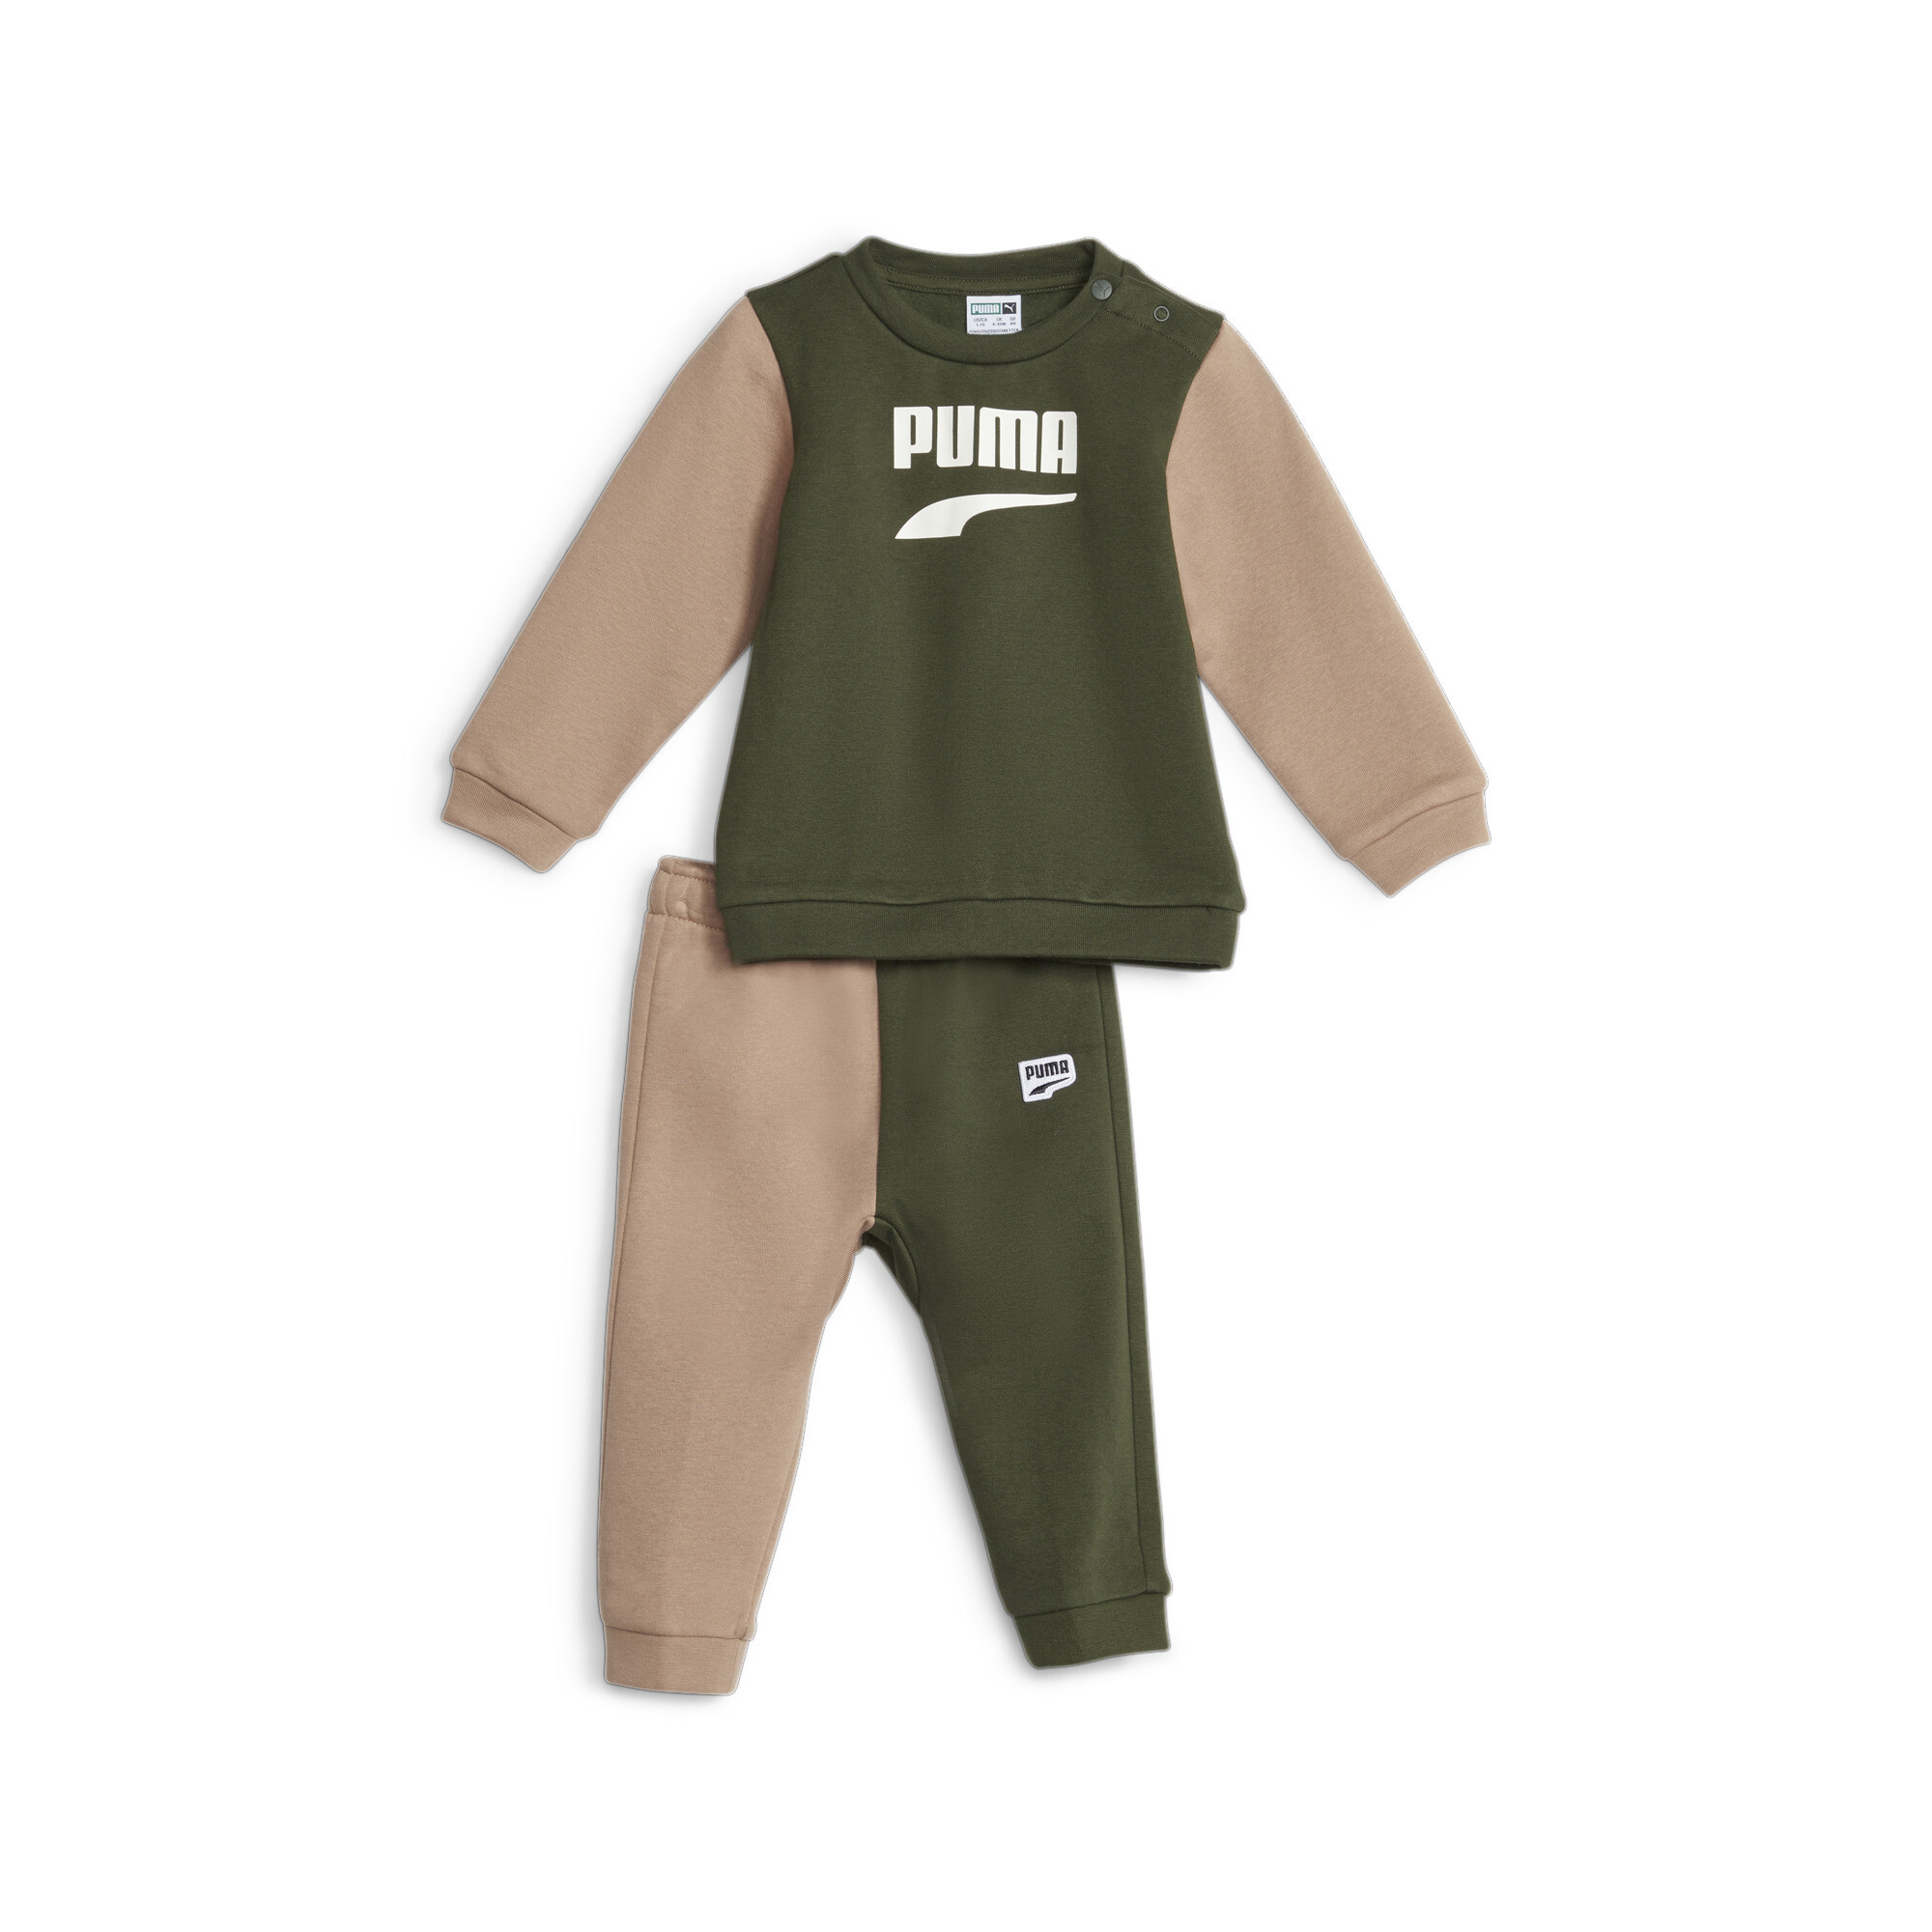 Puma Minicats Downtown Toddlers' Set, Green, Size 3-4Y, Clothing